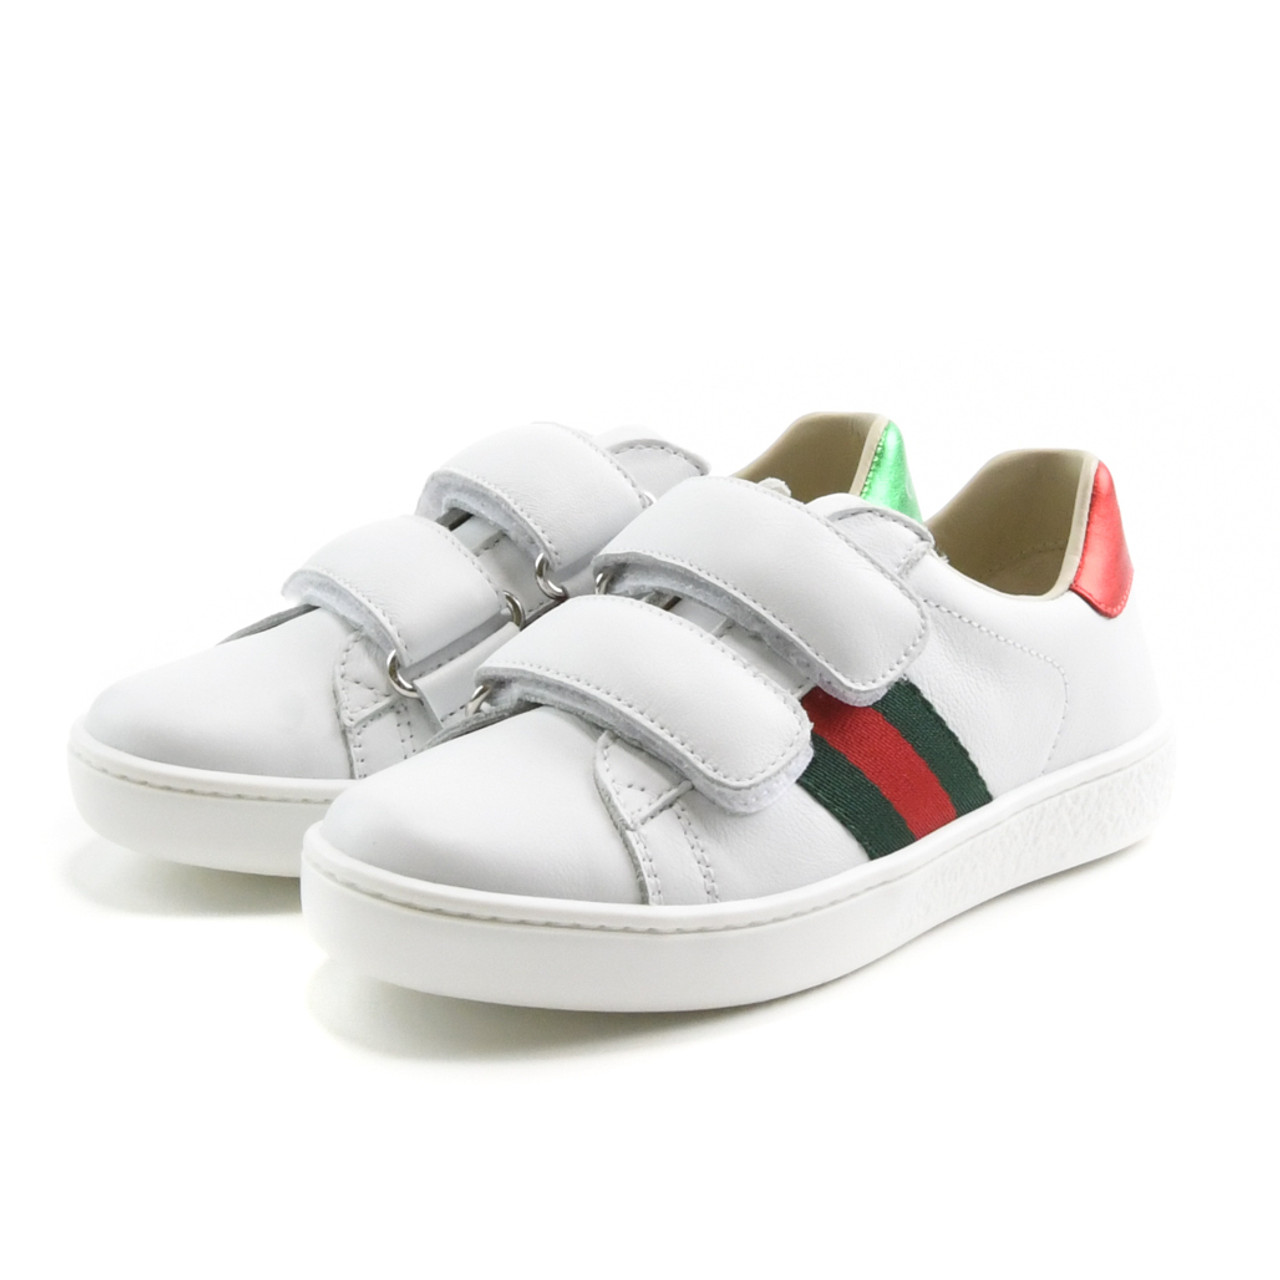 Details more than 121 gucci slippers girls super hot